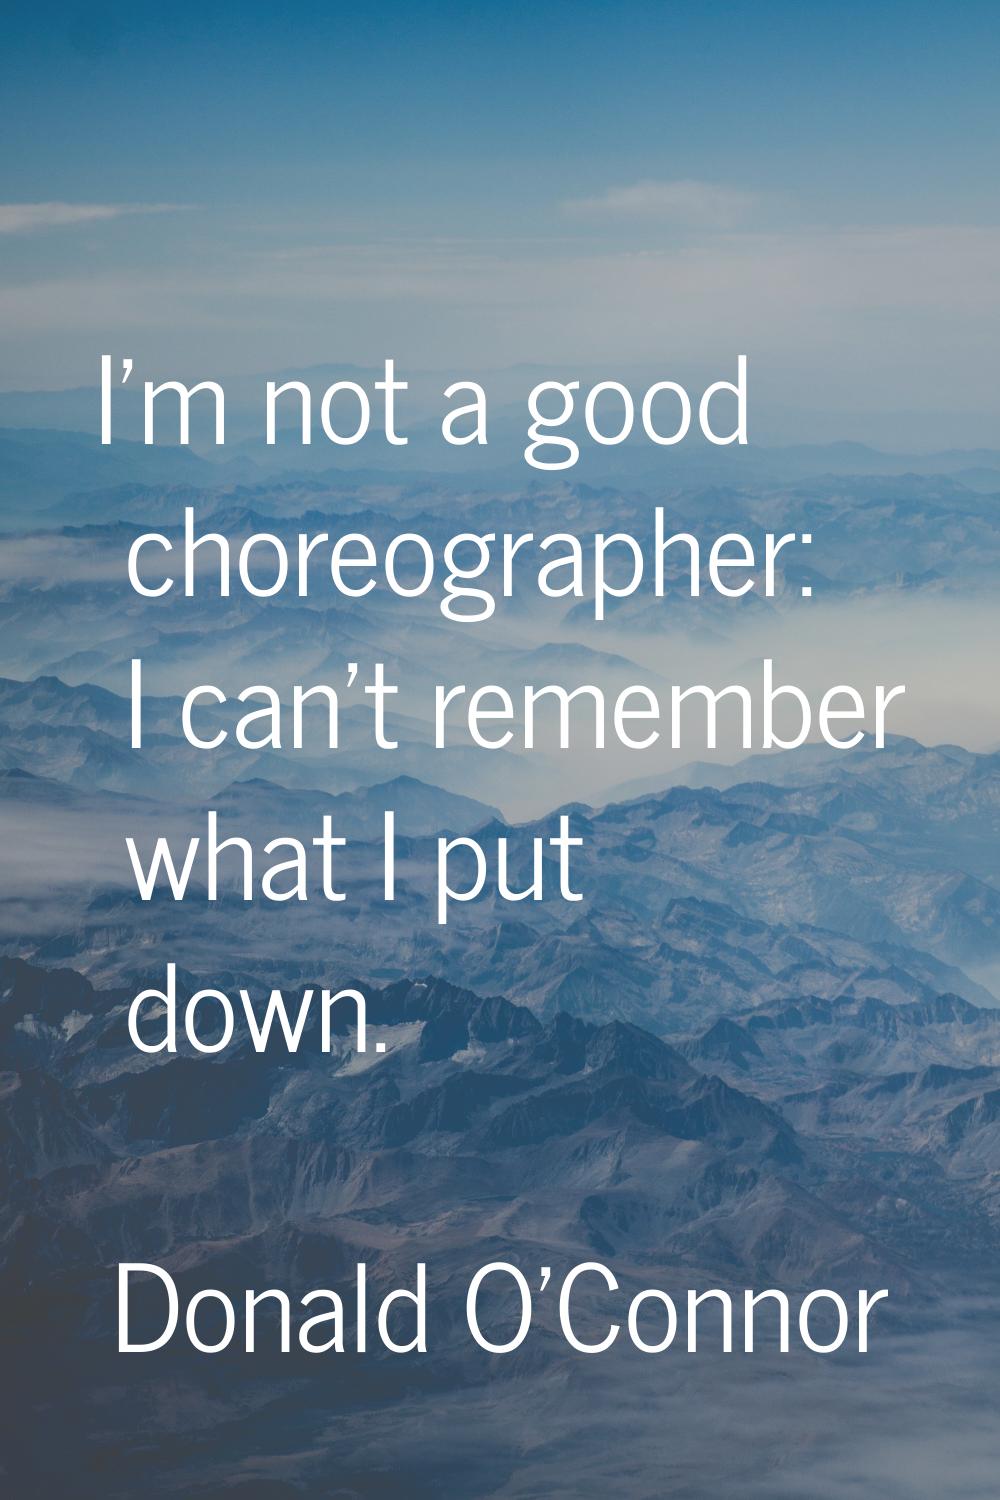 I'm not a good choreographer: I can't remember what I put down.